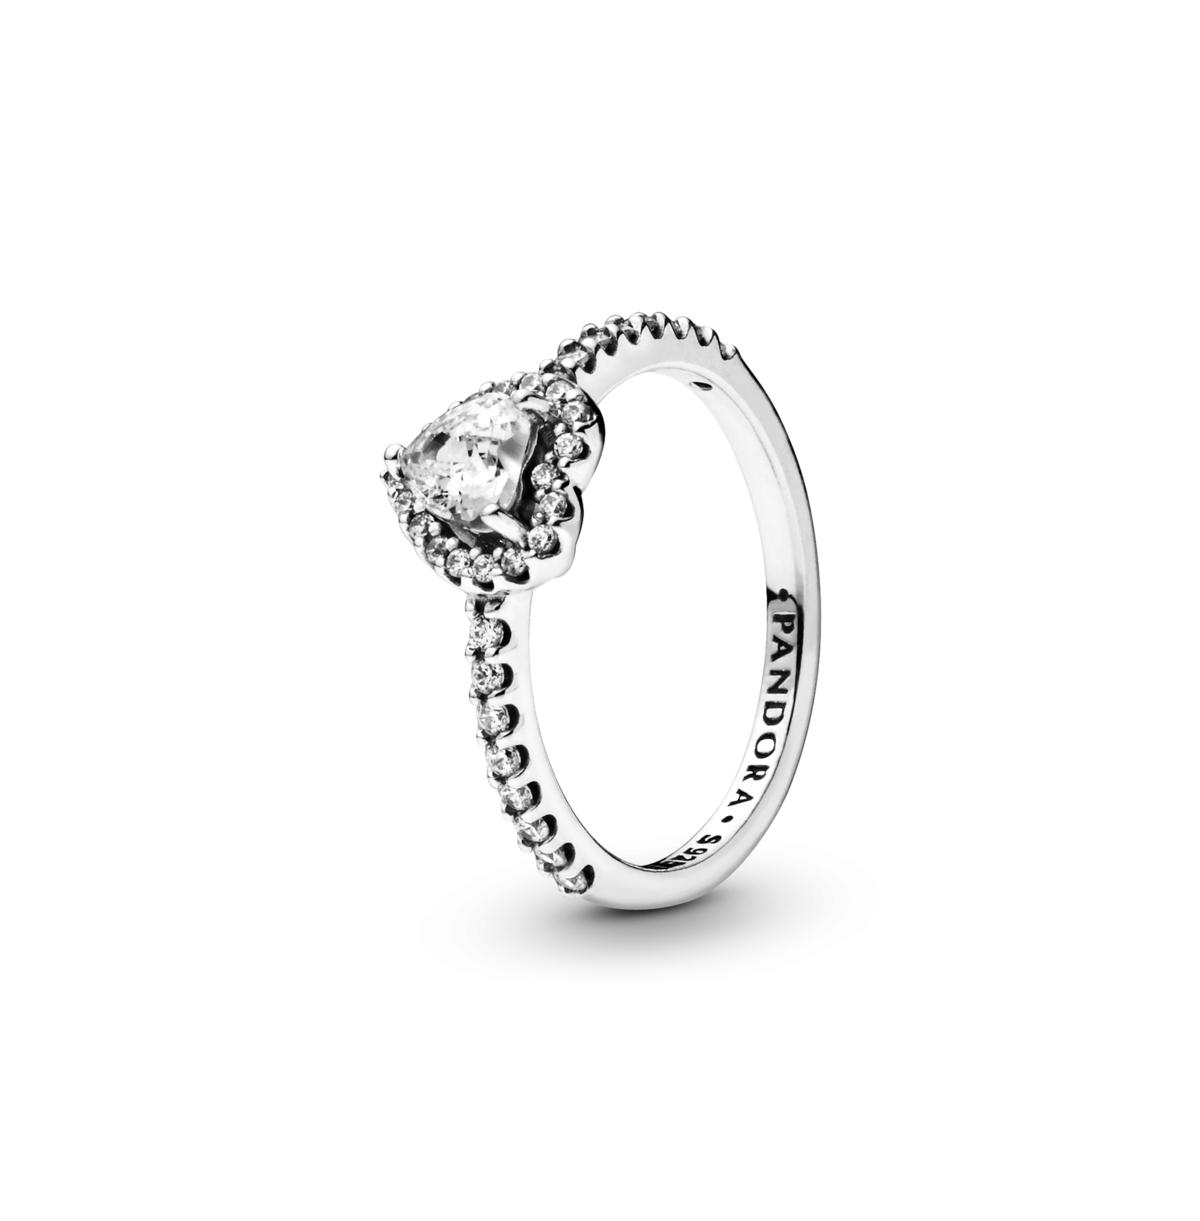 Pandora Sparkling Elevated Pink Crystal Heart & CZ Ring